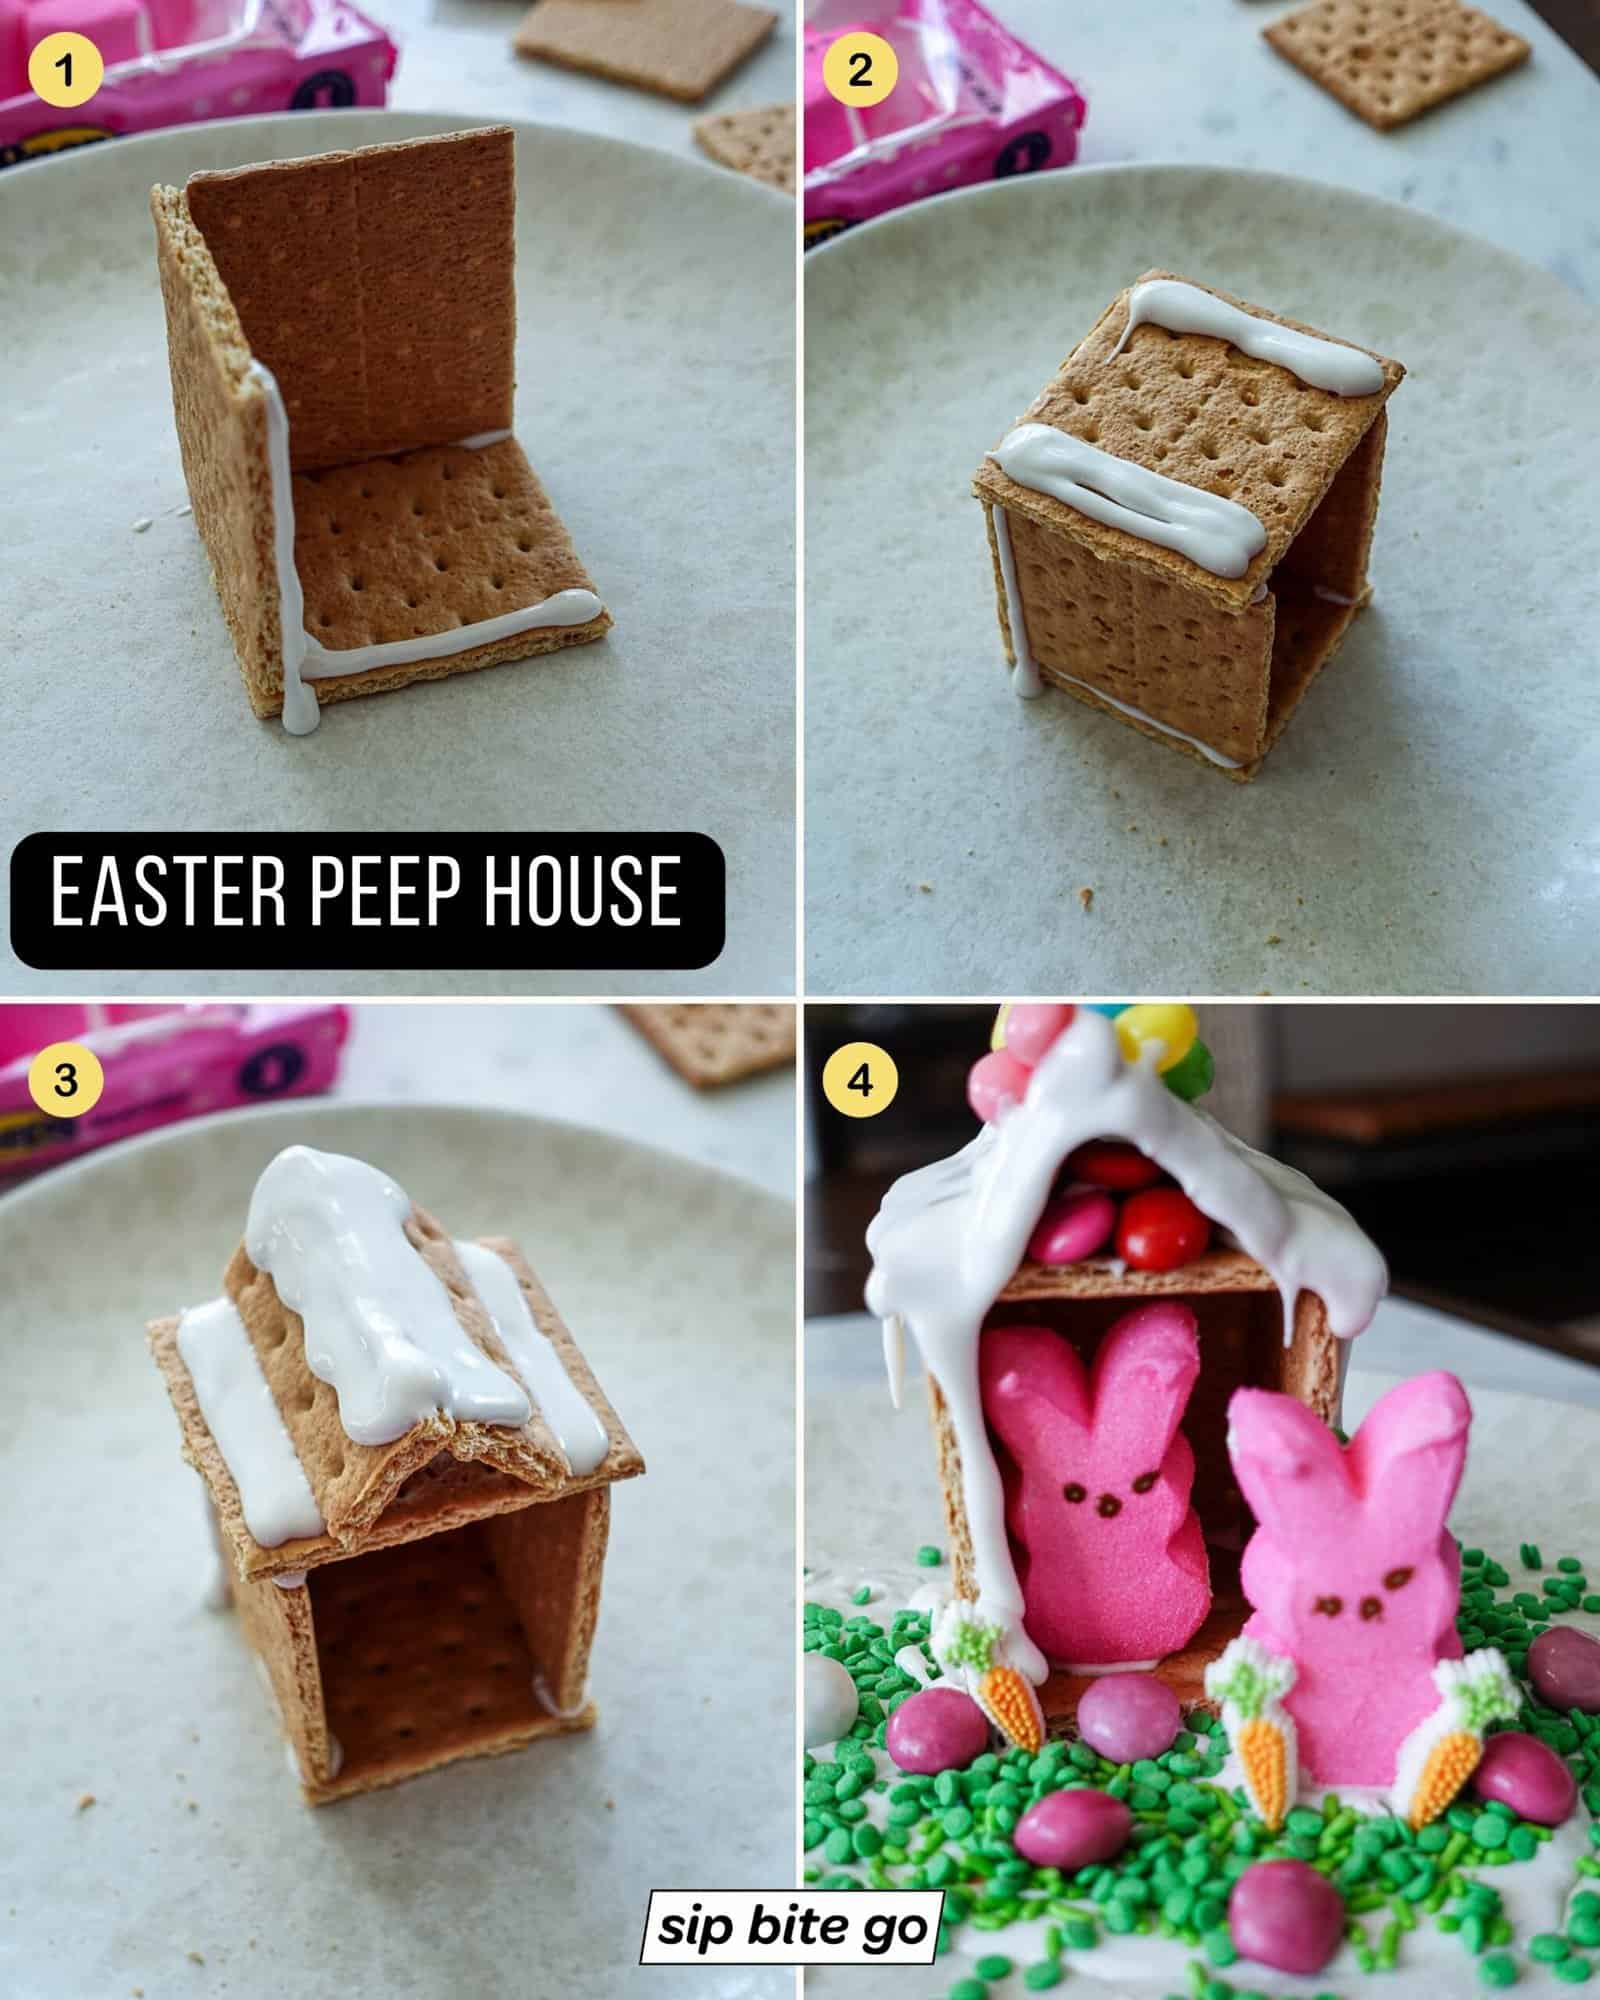 Basic steps to making a peeps Easter candy house